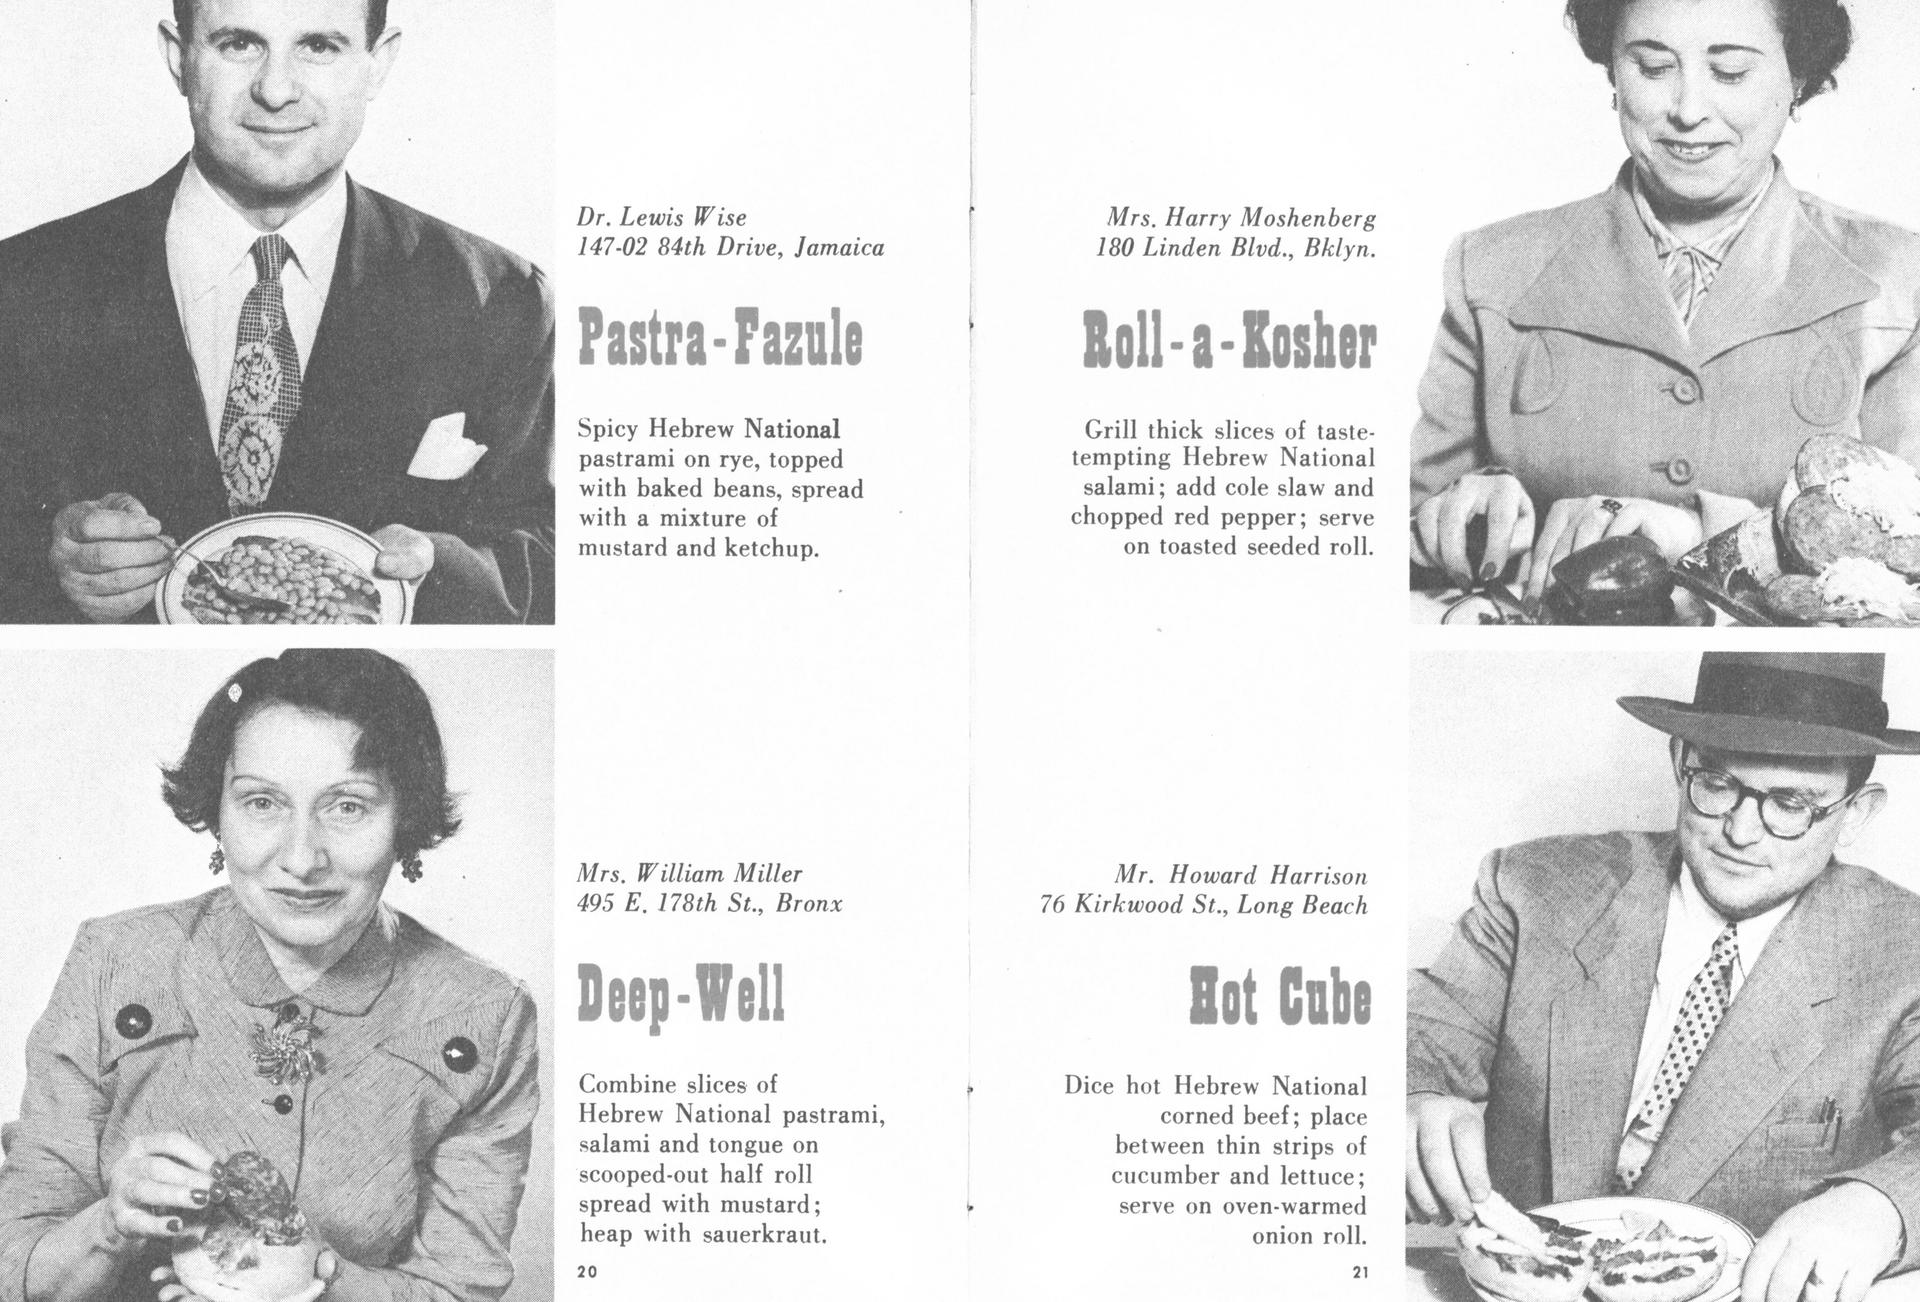 Ordinary New Yorkers with their sandwich creations depicted in a 1950s Hebrew National Promotion booklet.